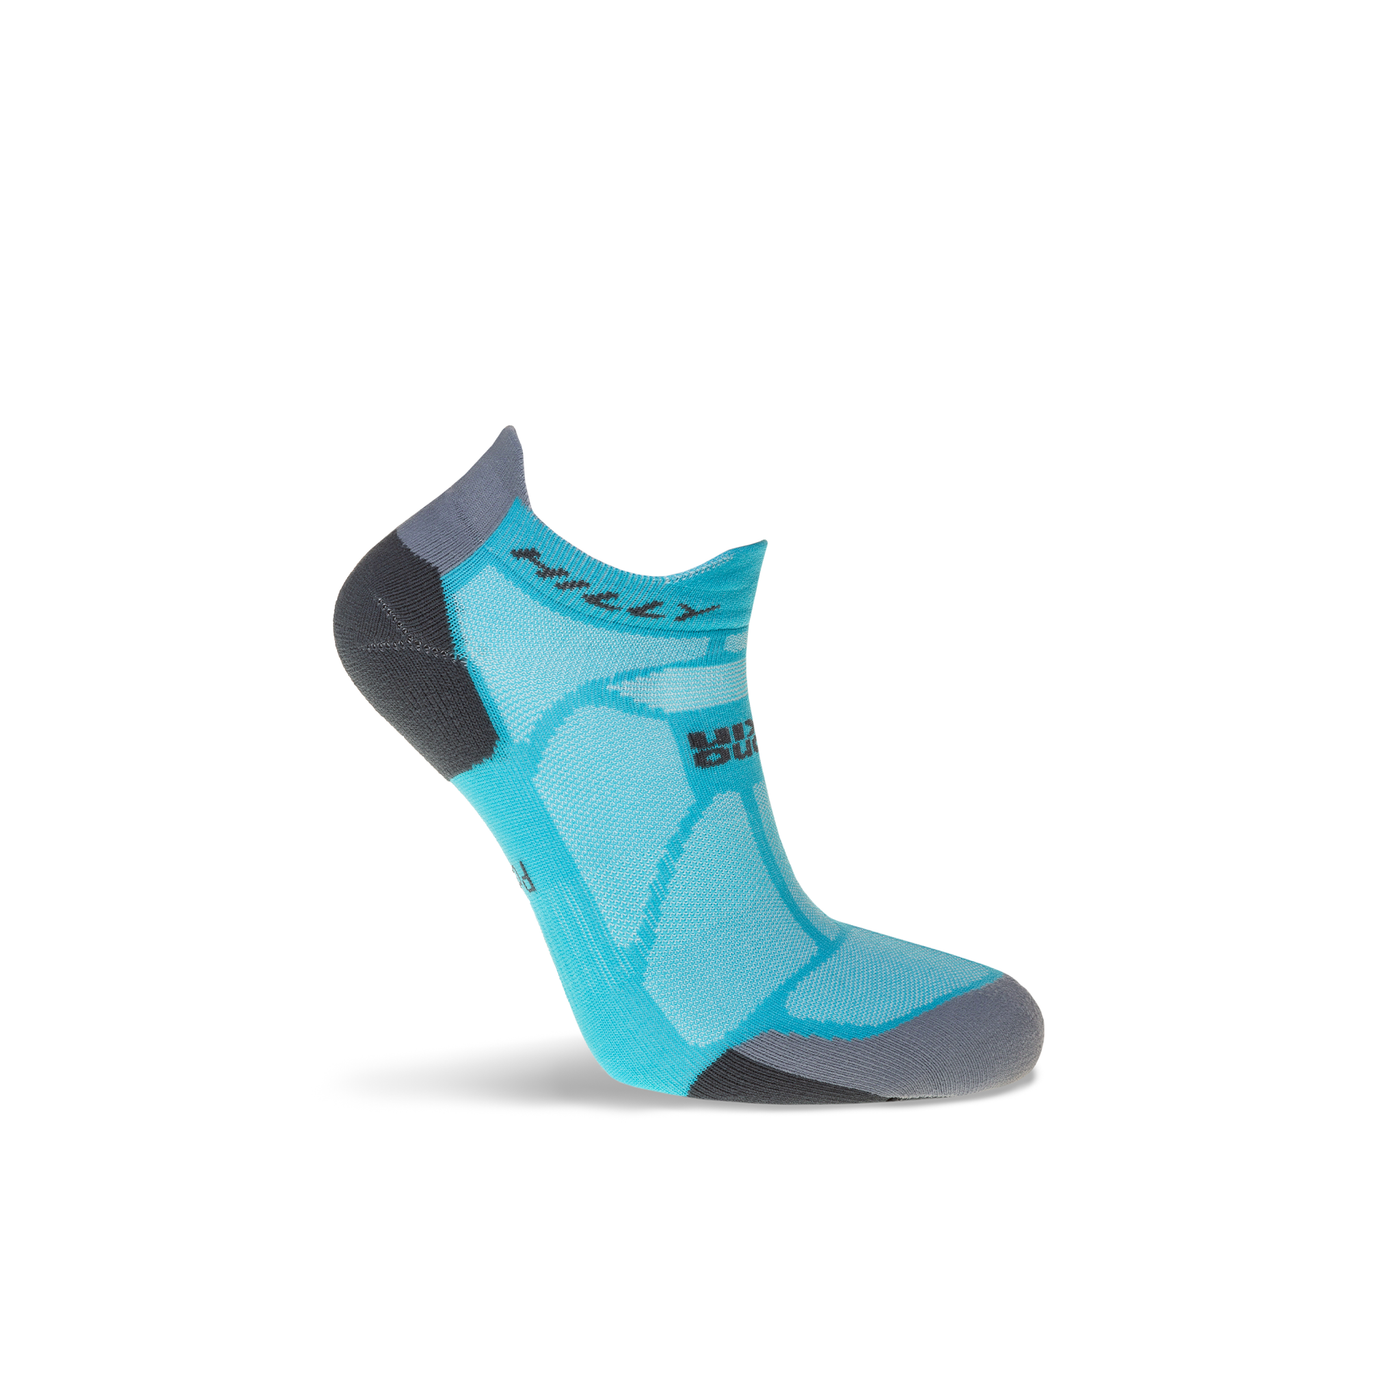 Hilly Womens Marathon Fresh Socklet - Peacock/Charcoal